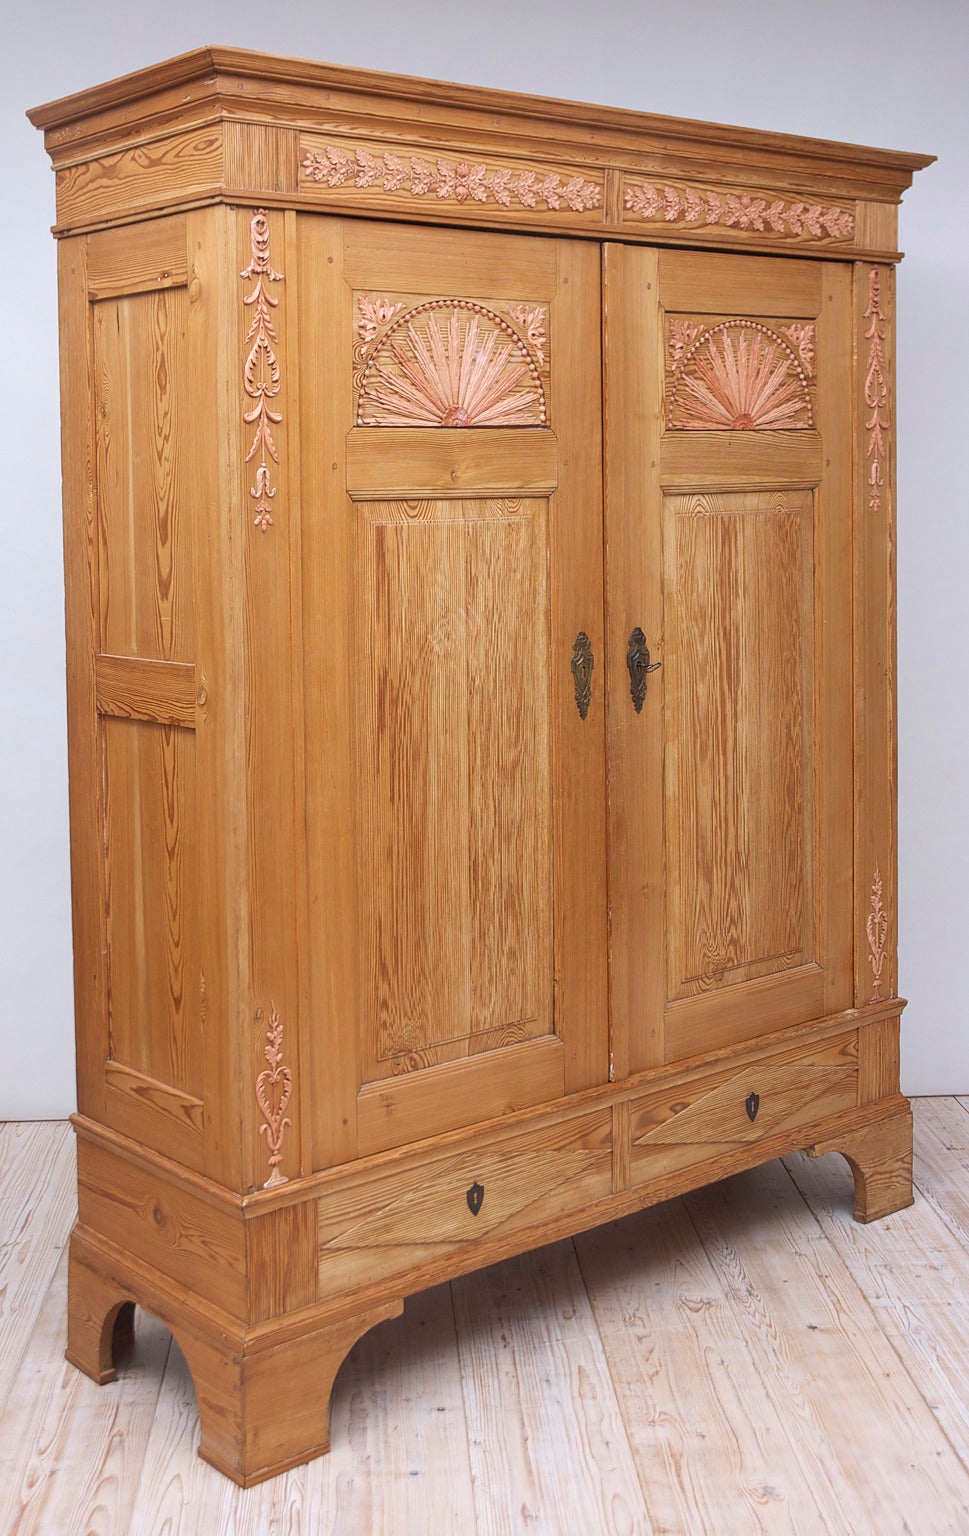 This exceptional one-of-a-kind armoire from the area of Bremen has the original pink gesso appliqués, circa 1790.  Fabricated from a beautiful knot-less dense pine, the carved ribbed panels on the doors and drawers and the strong bracket feet are